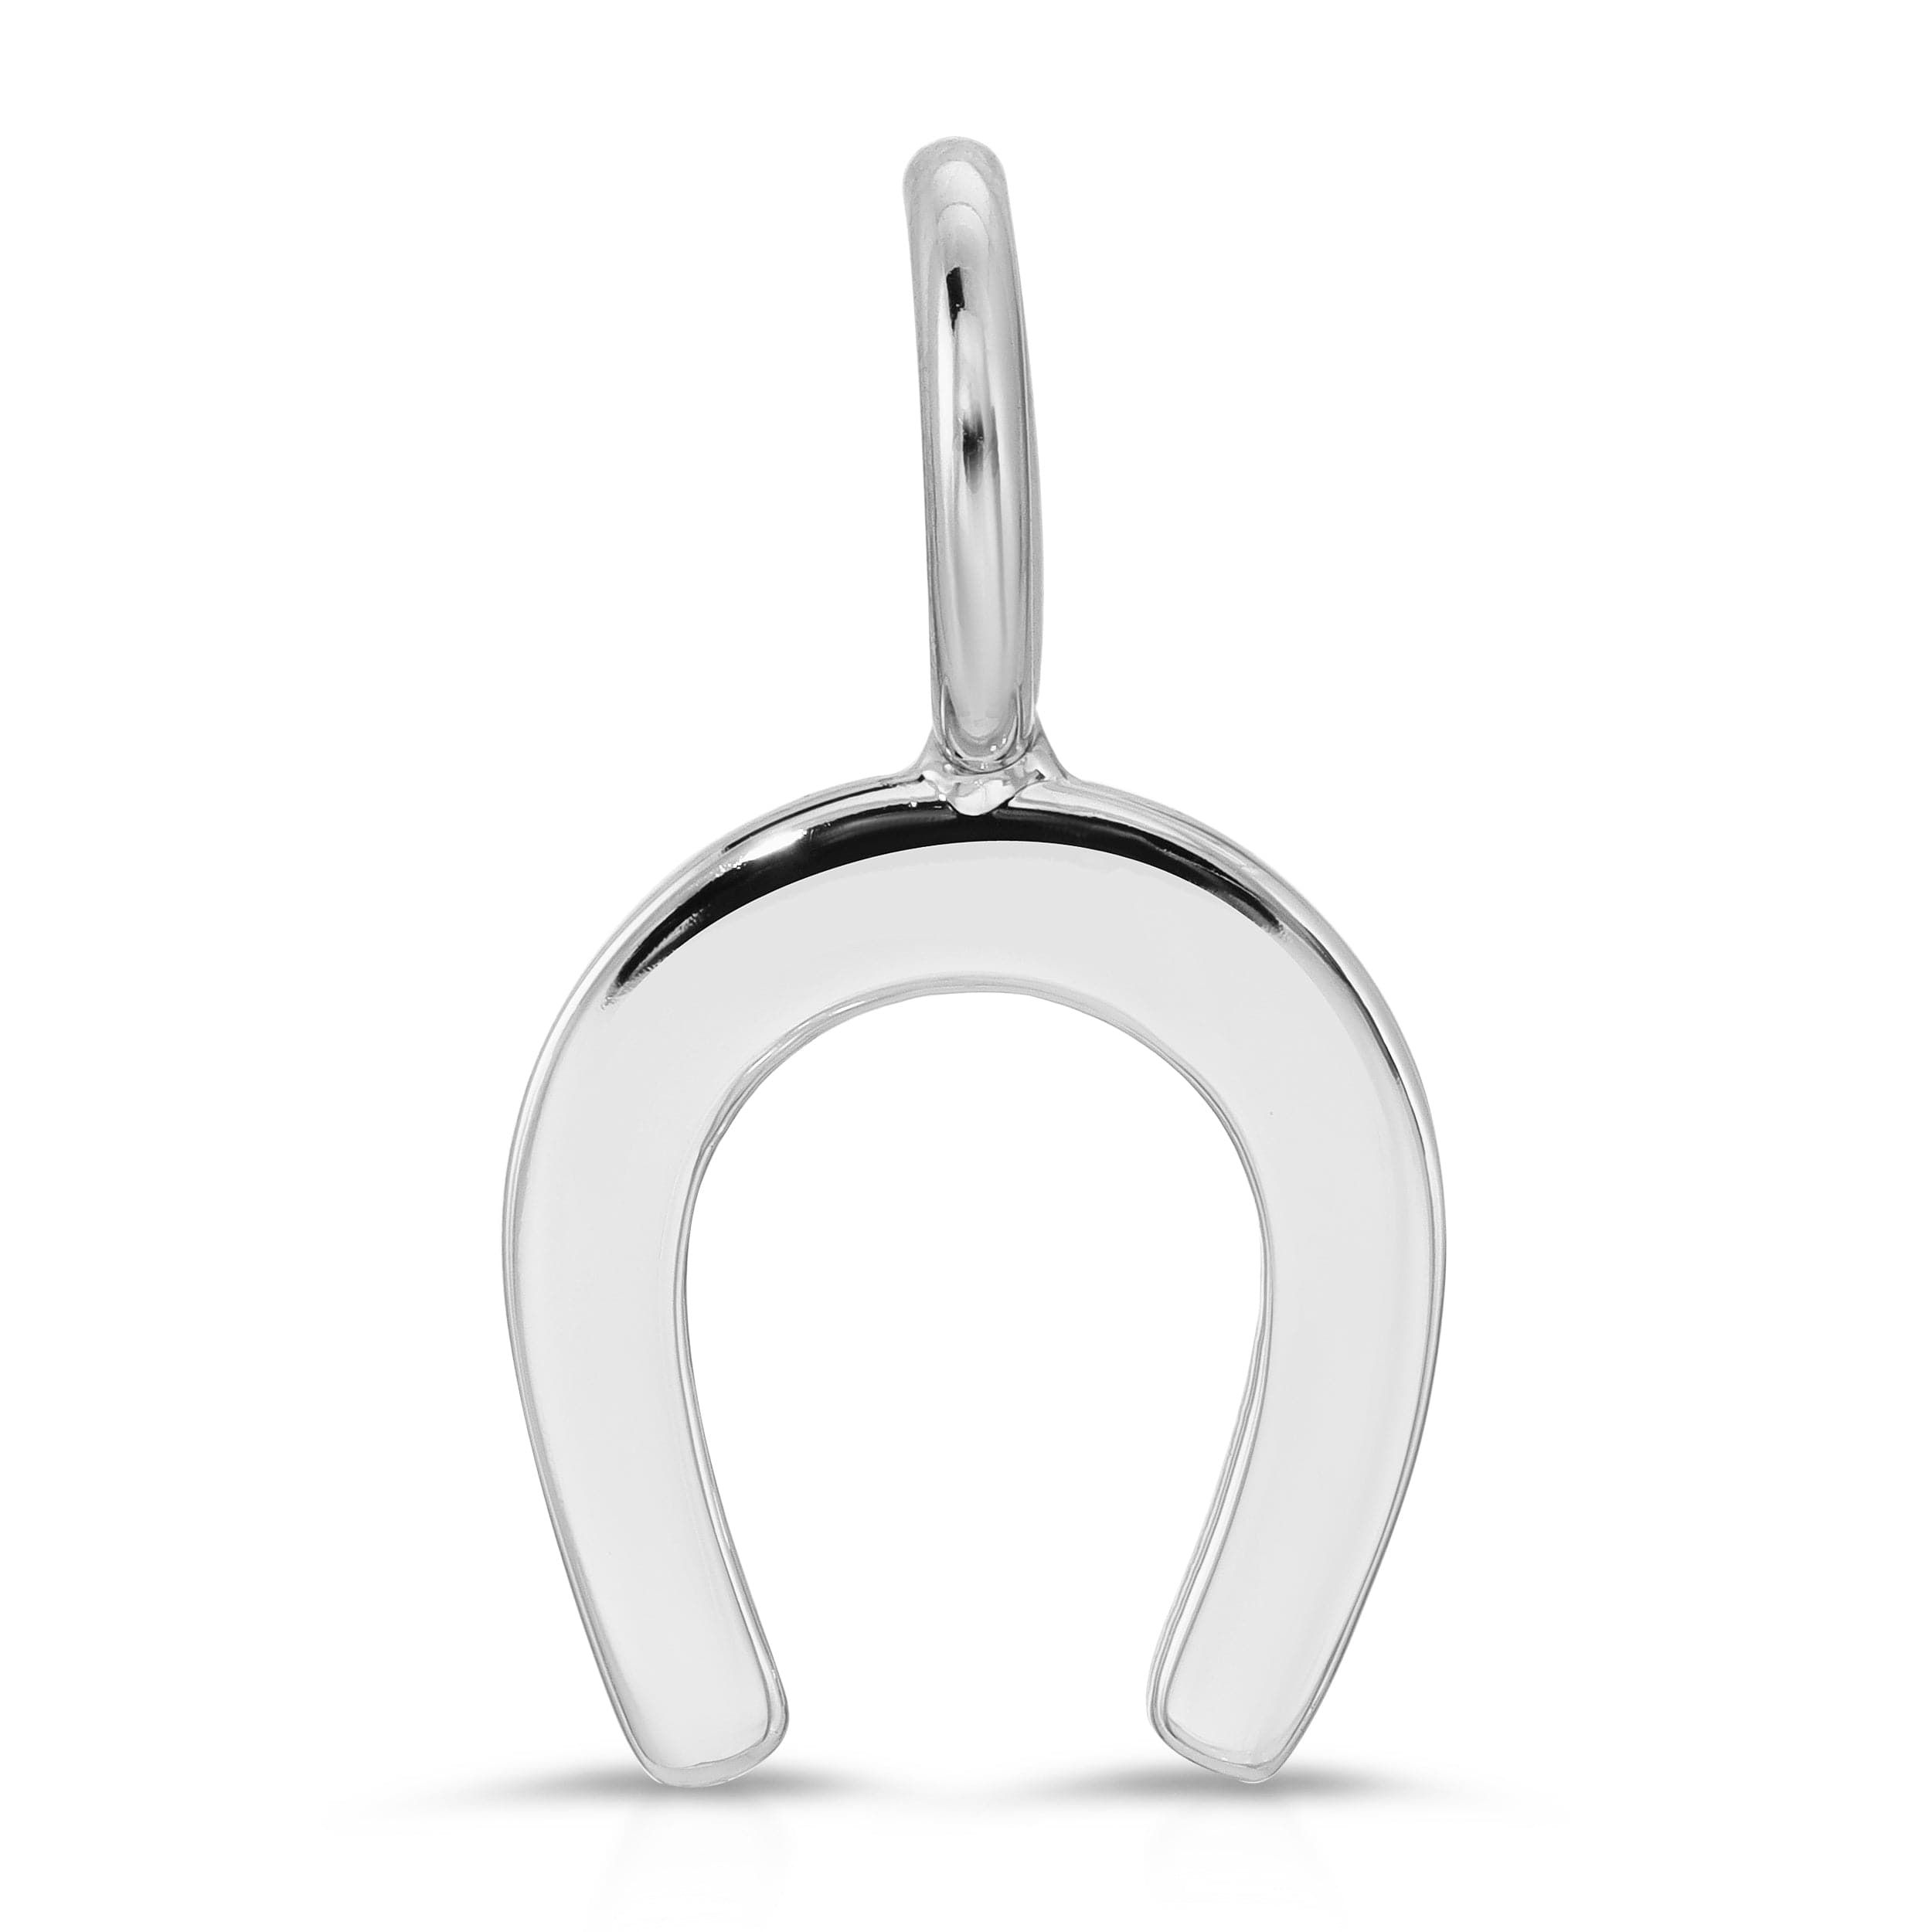 a silver pendant with a curved handle on a white background